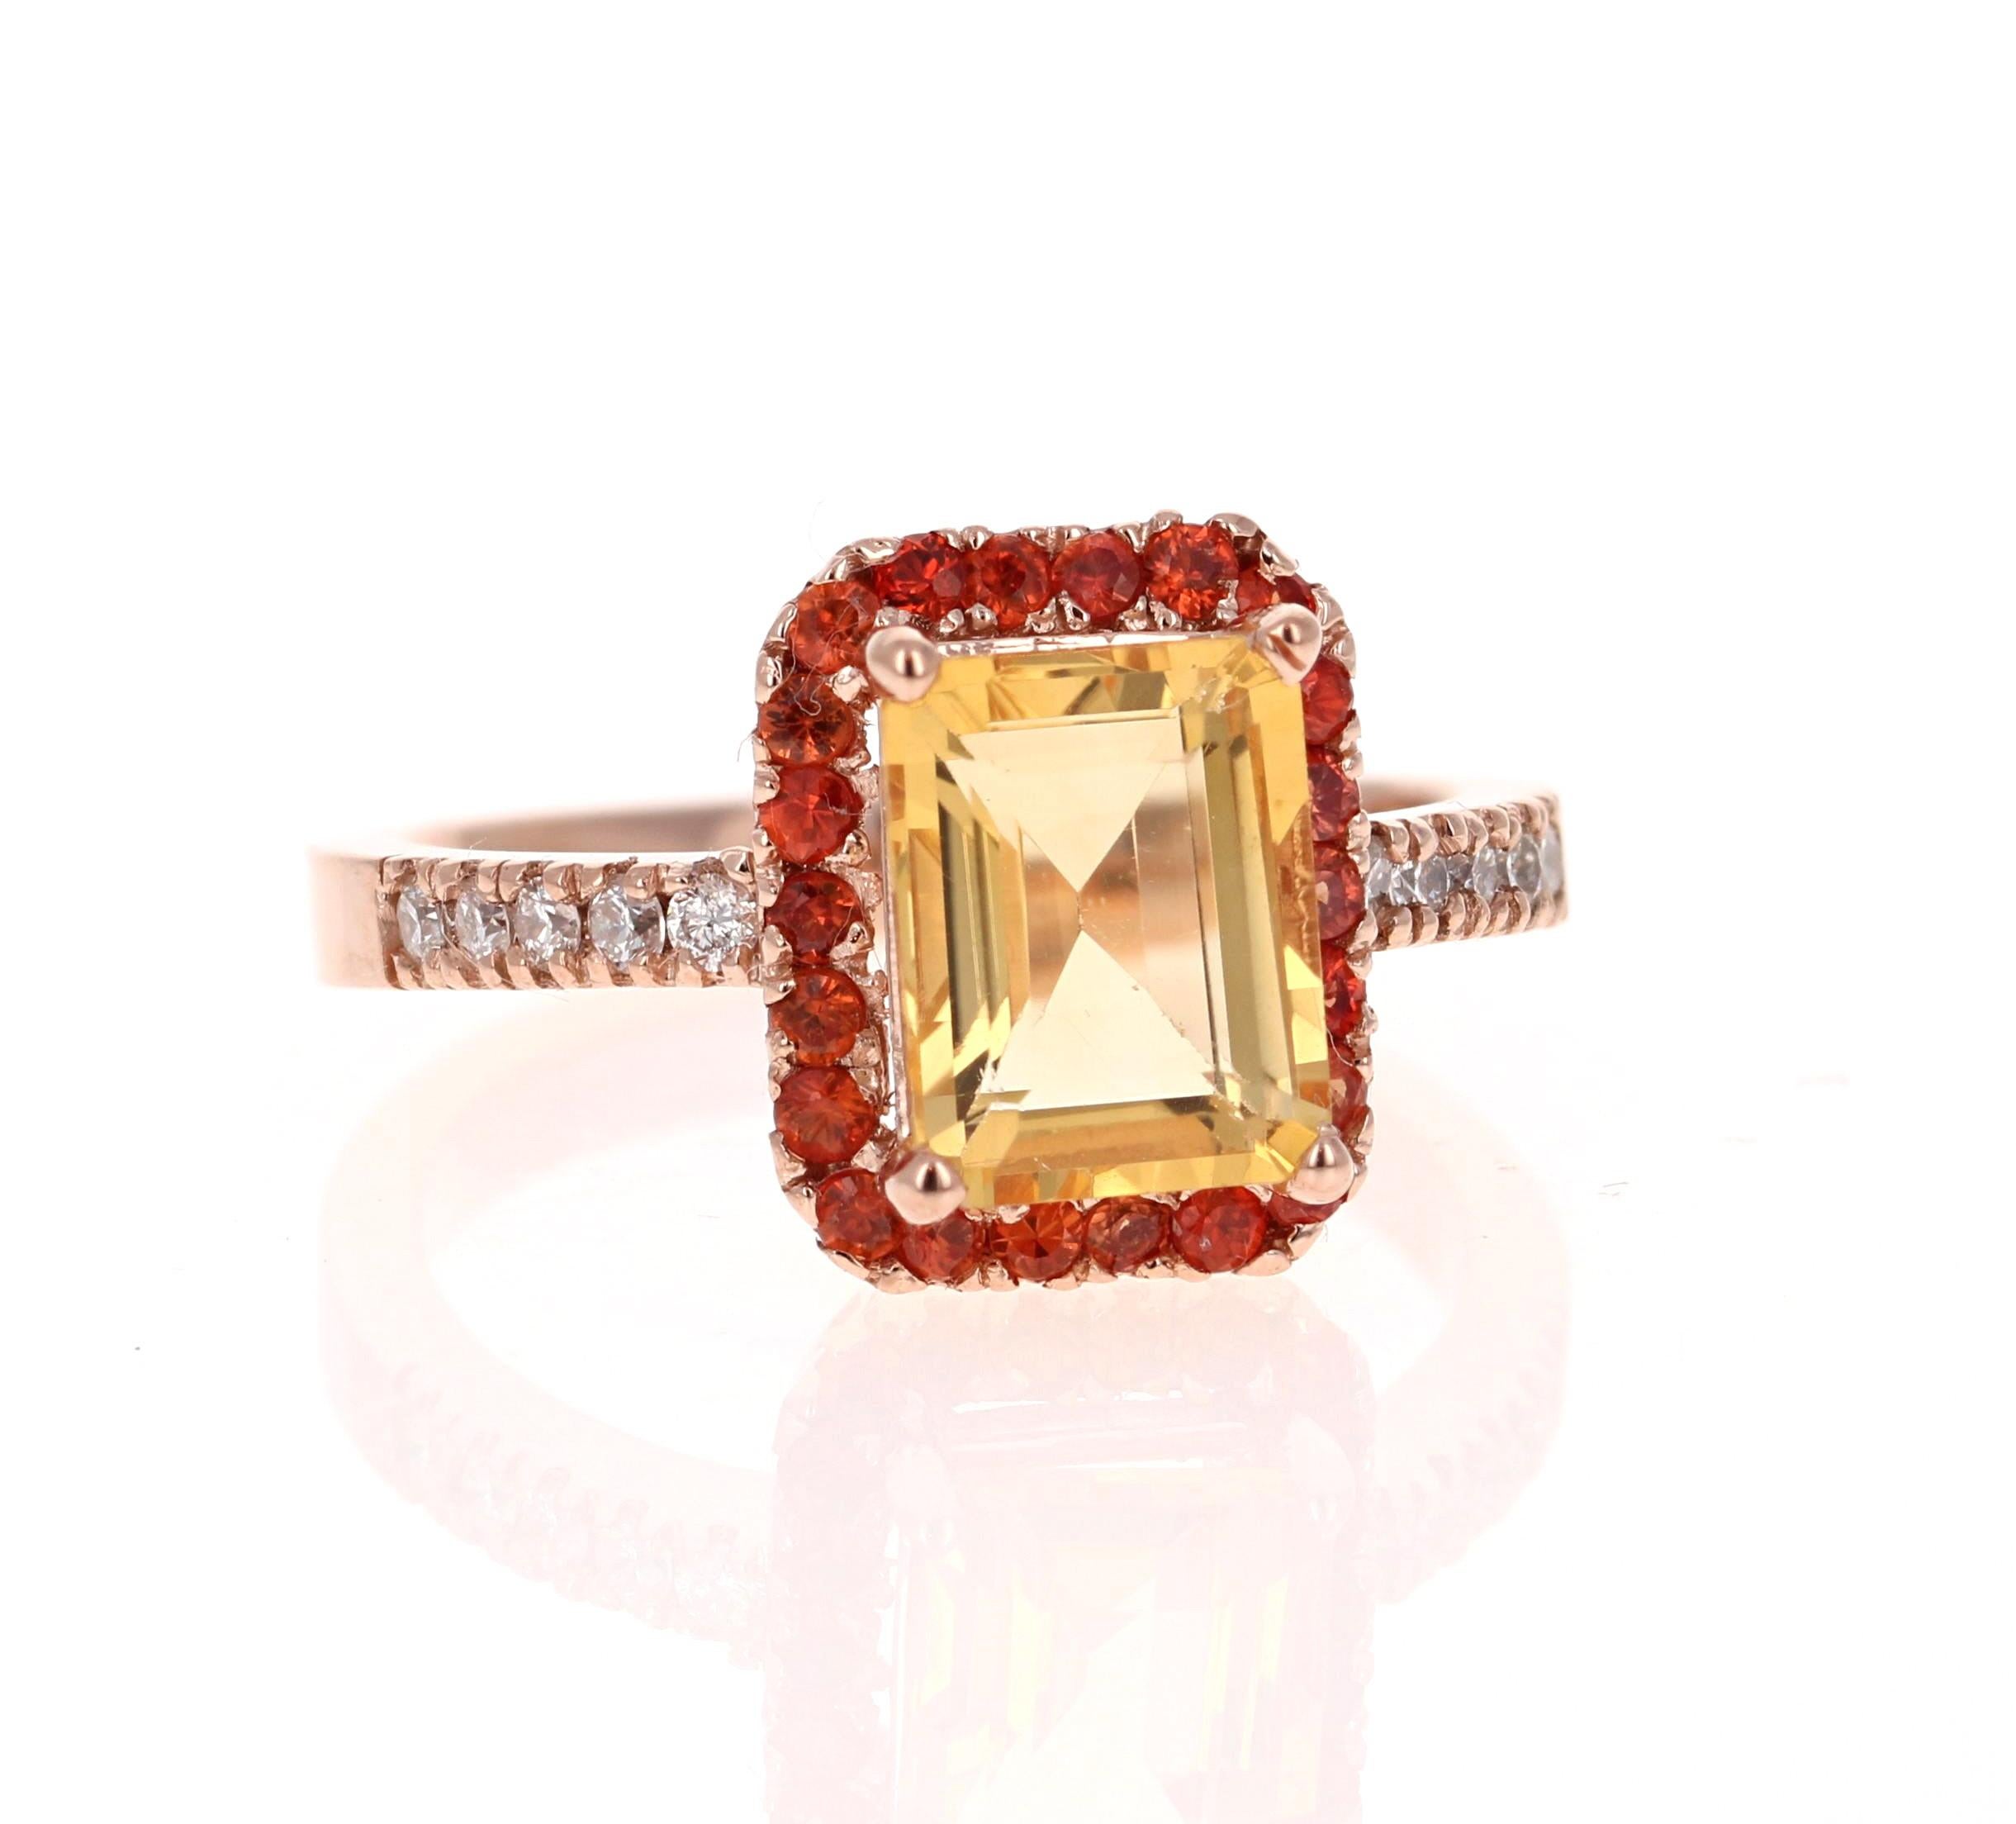 This gorgeous ring has a beautiful Emerald Cut Citrine Quartz weighing 2.23 Carats and is surrounded by a Halo of 22 Round Cut Orange Sapphires weighing 0.50 Carats.  Along the shank of the ring are 10 Round Cut Diamonds that weigh 0.18 Carats